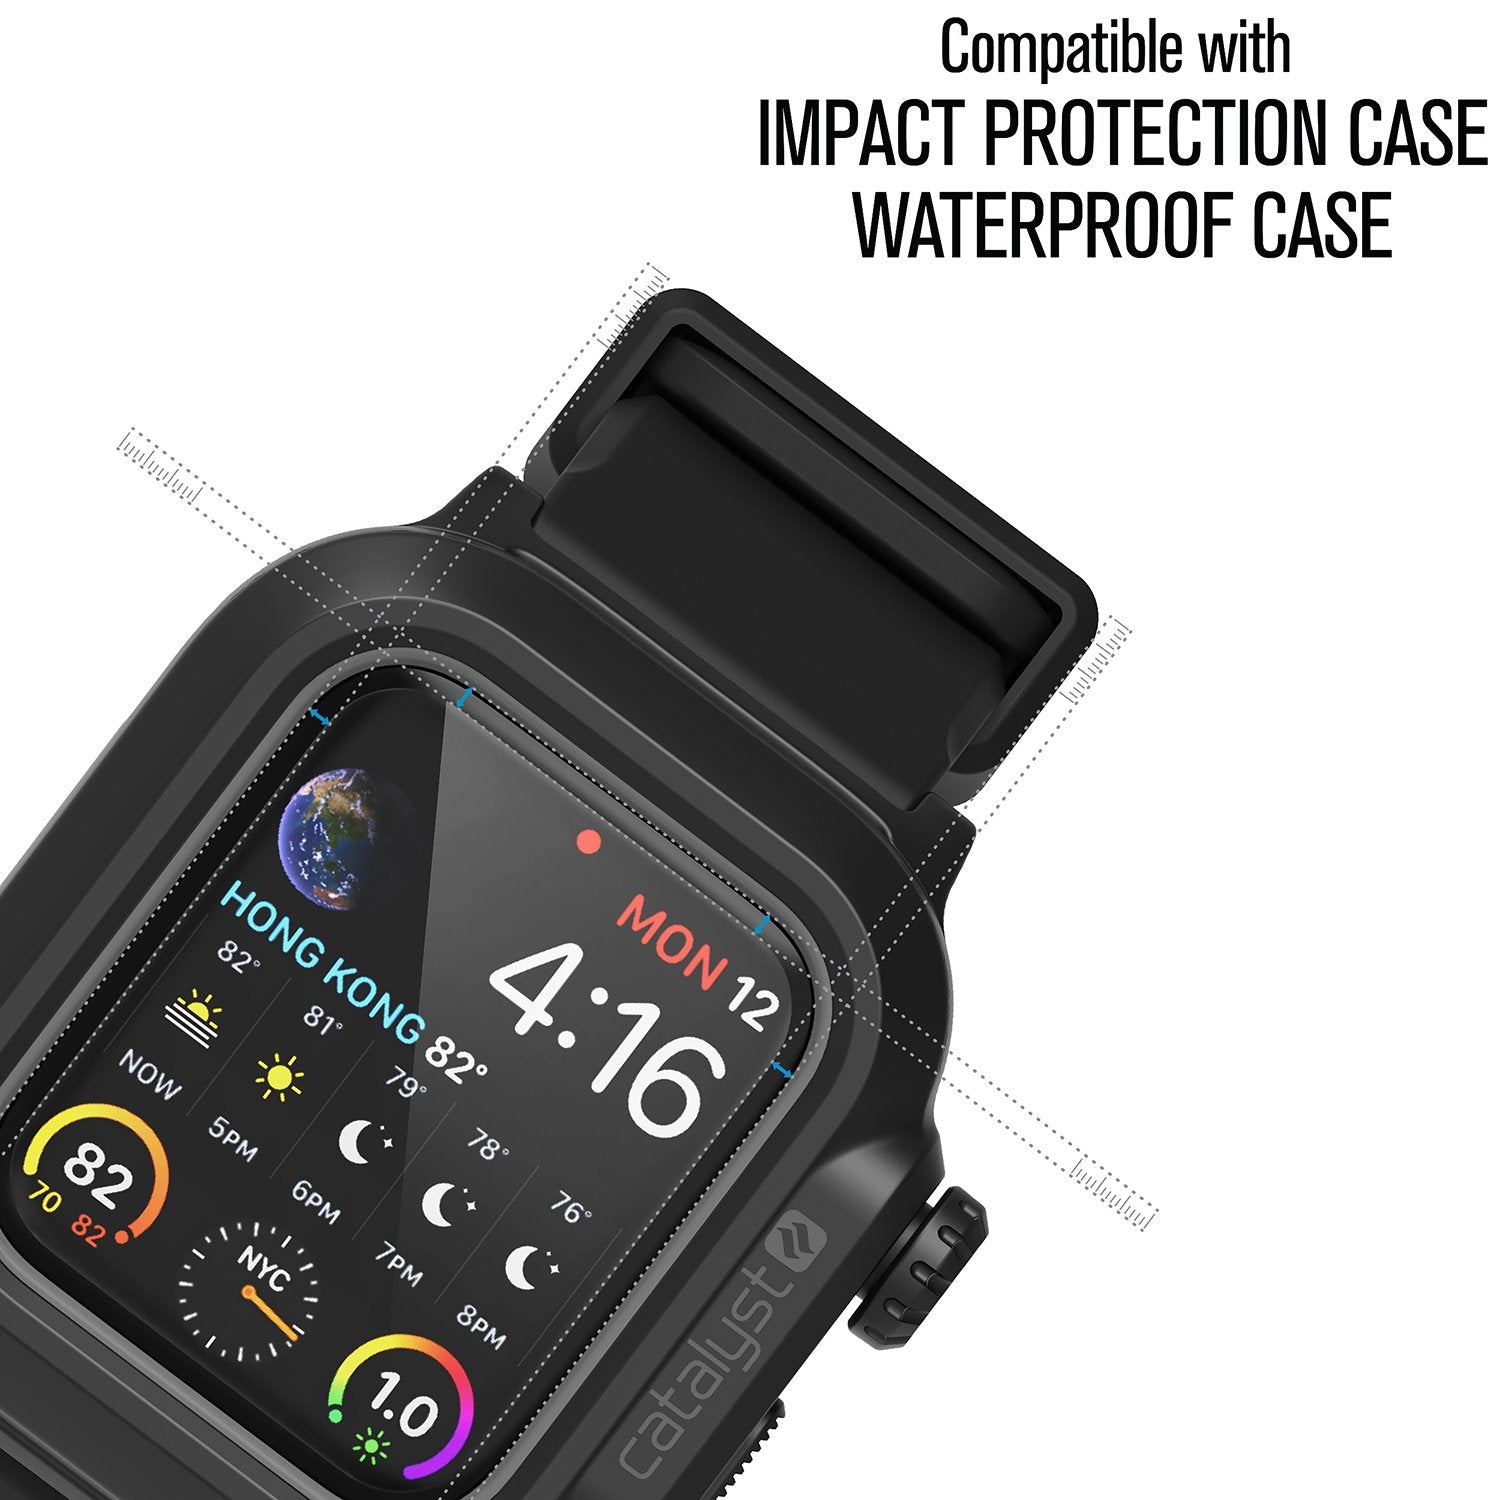 catalyst apple watch series 6 5 4 se gen 2 1 40mm screen protector 2 pack front view of the apple watch with catalyst text reads compatible with impact protection case waterproof case